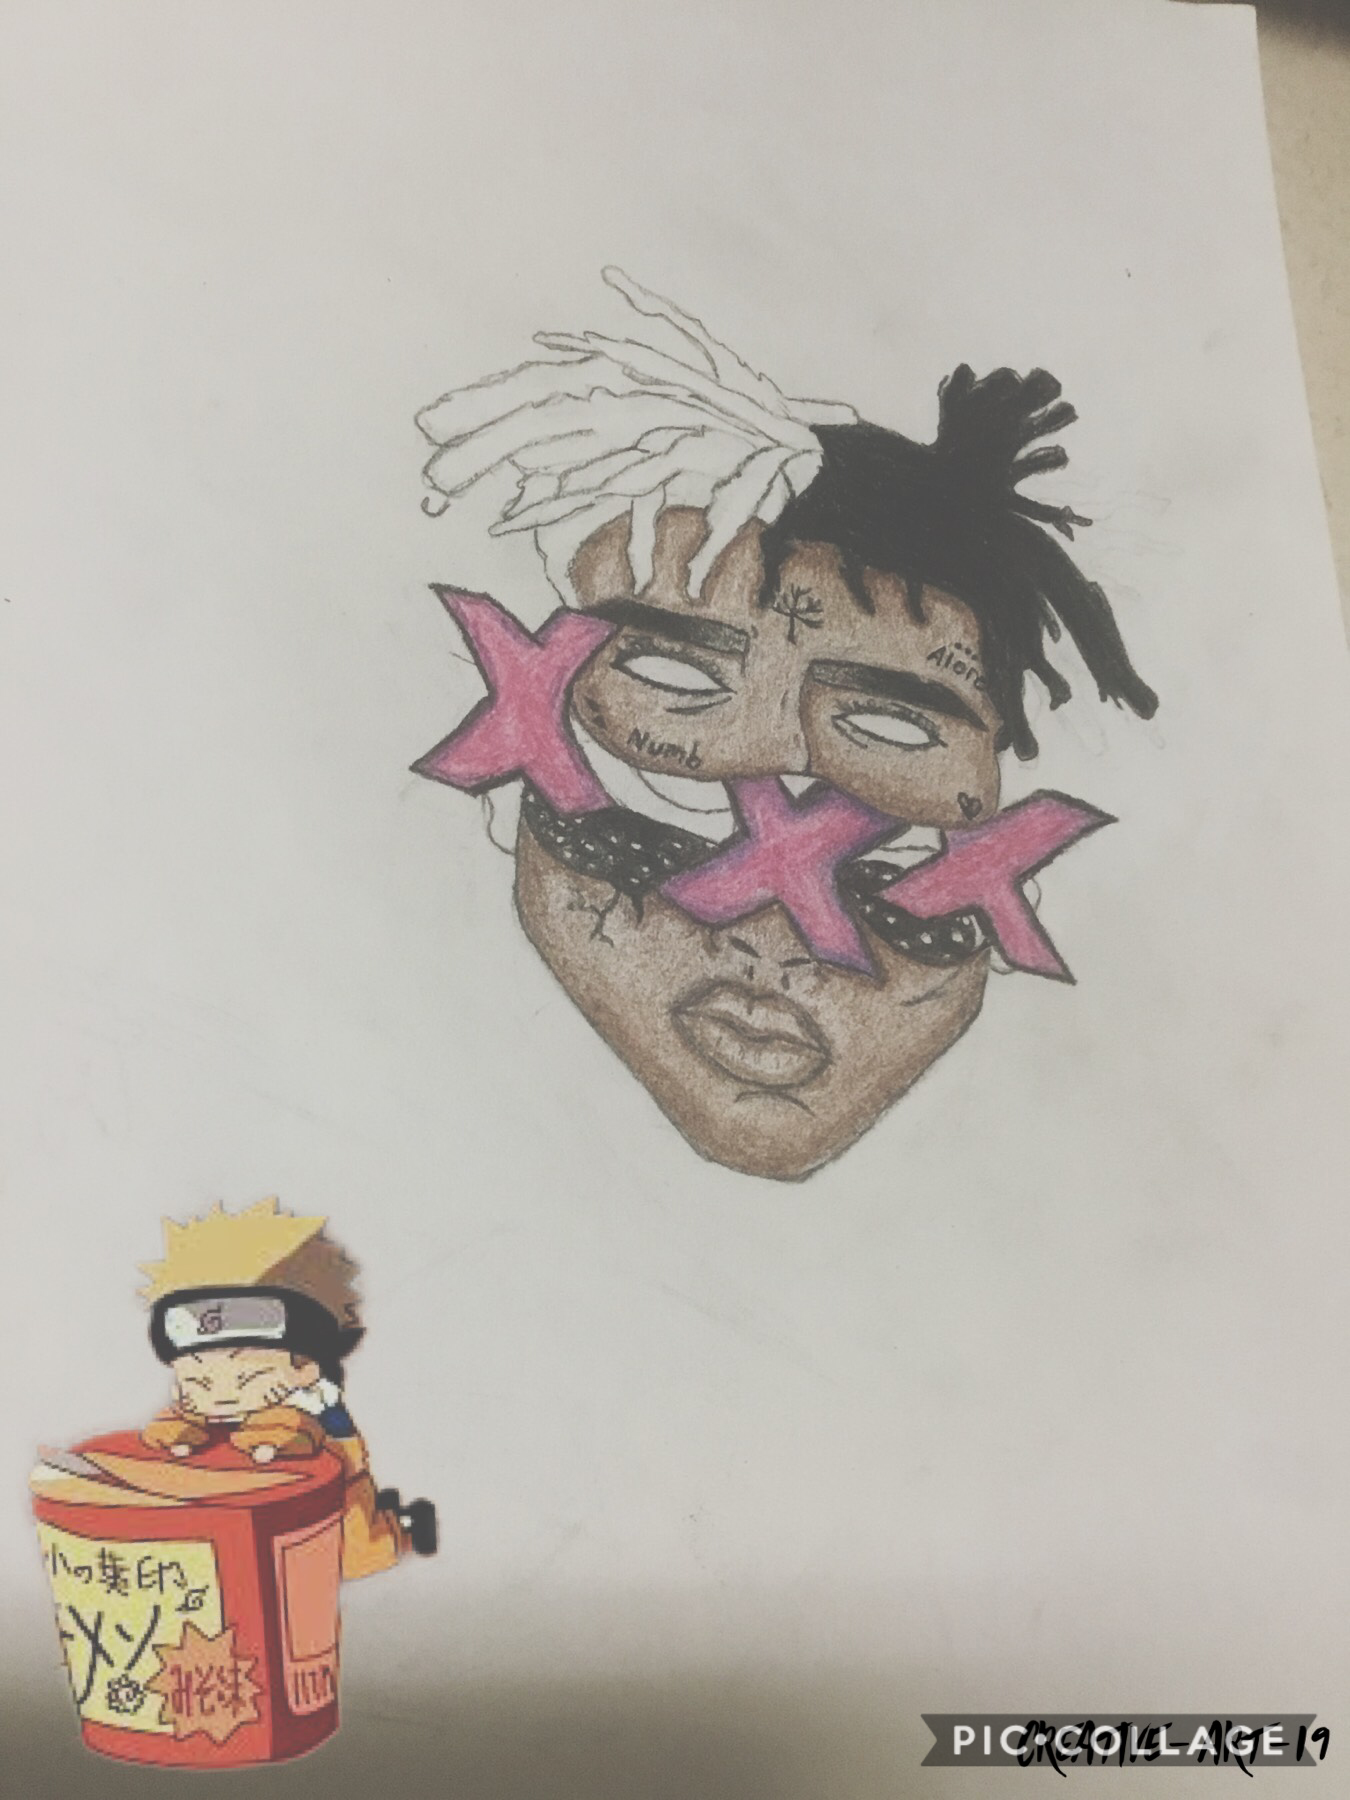 Rip X lots more new art on its way 😂😊❤️💕💞